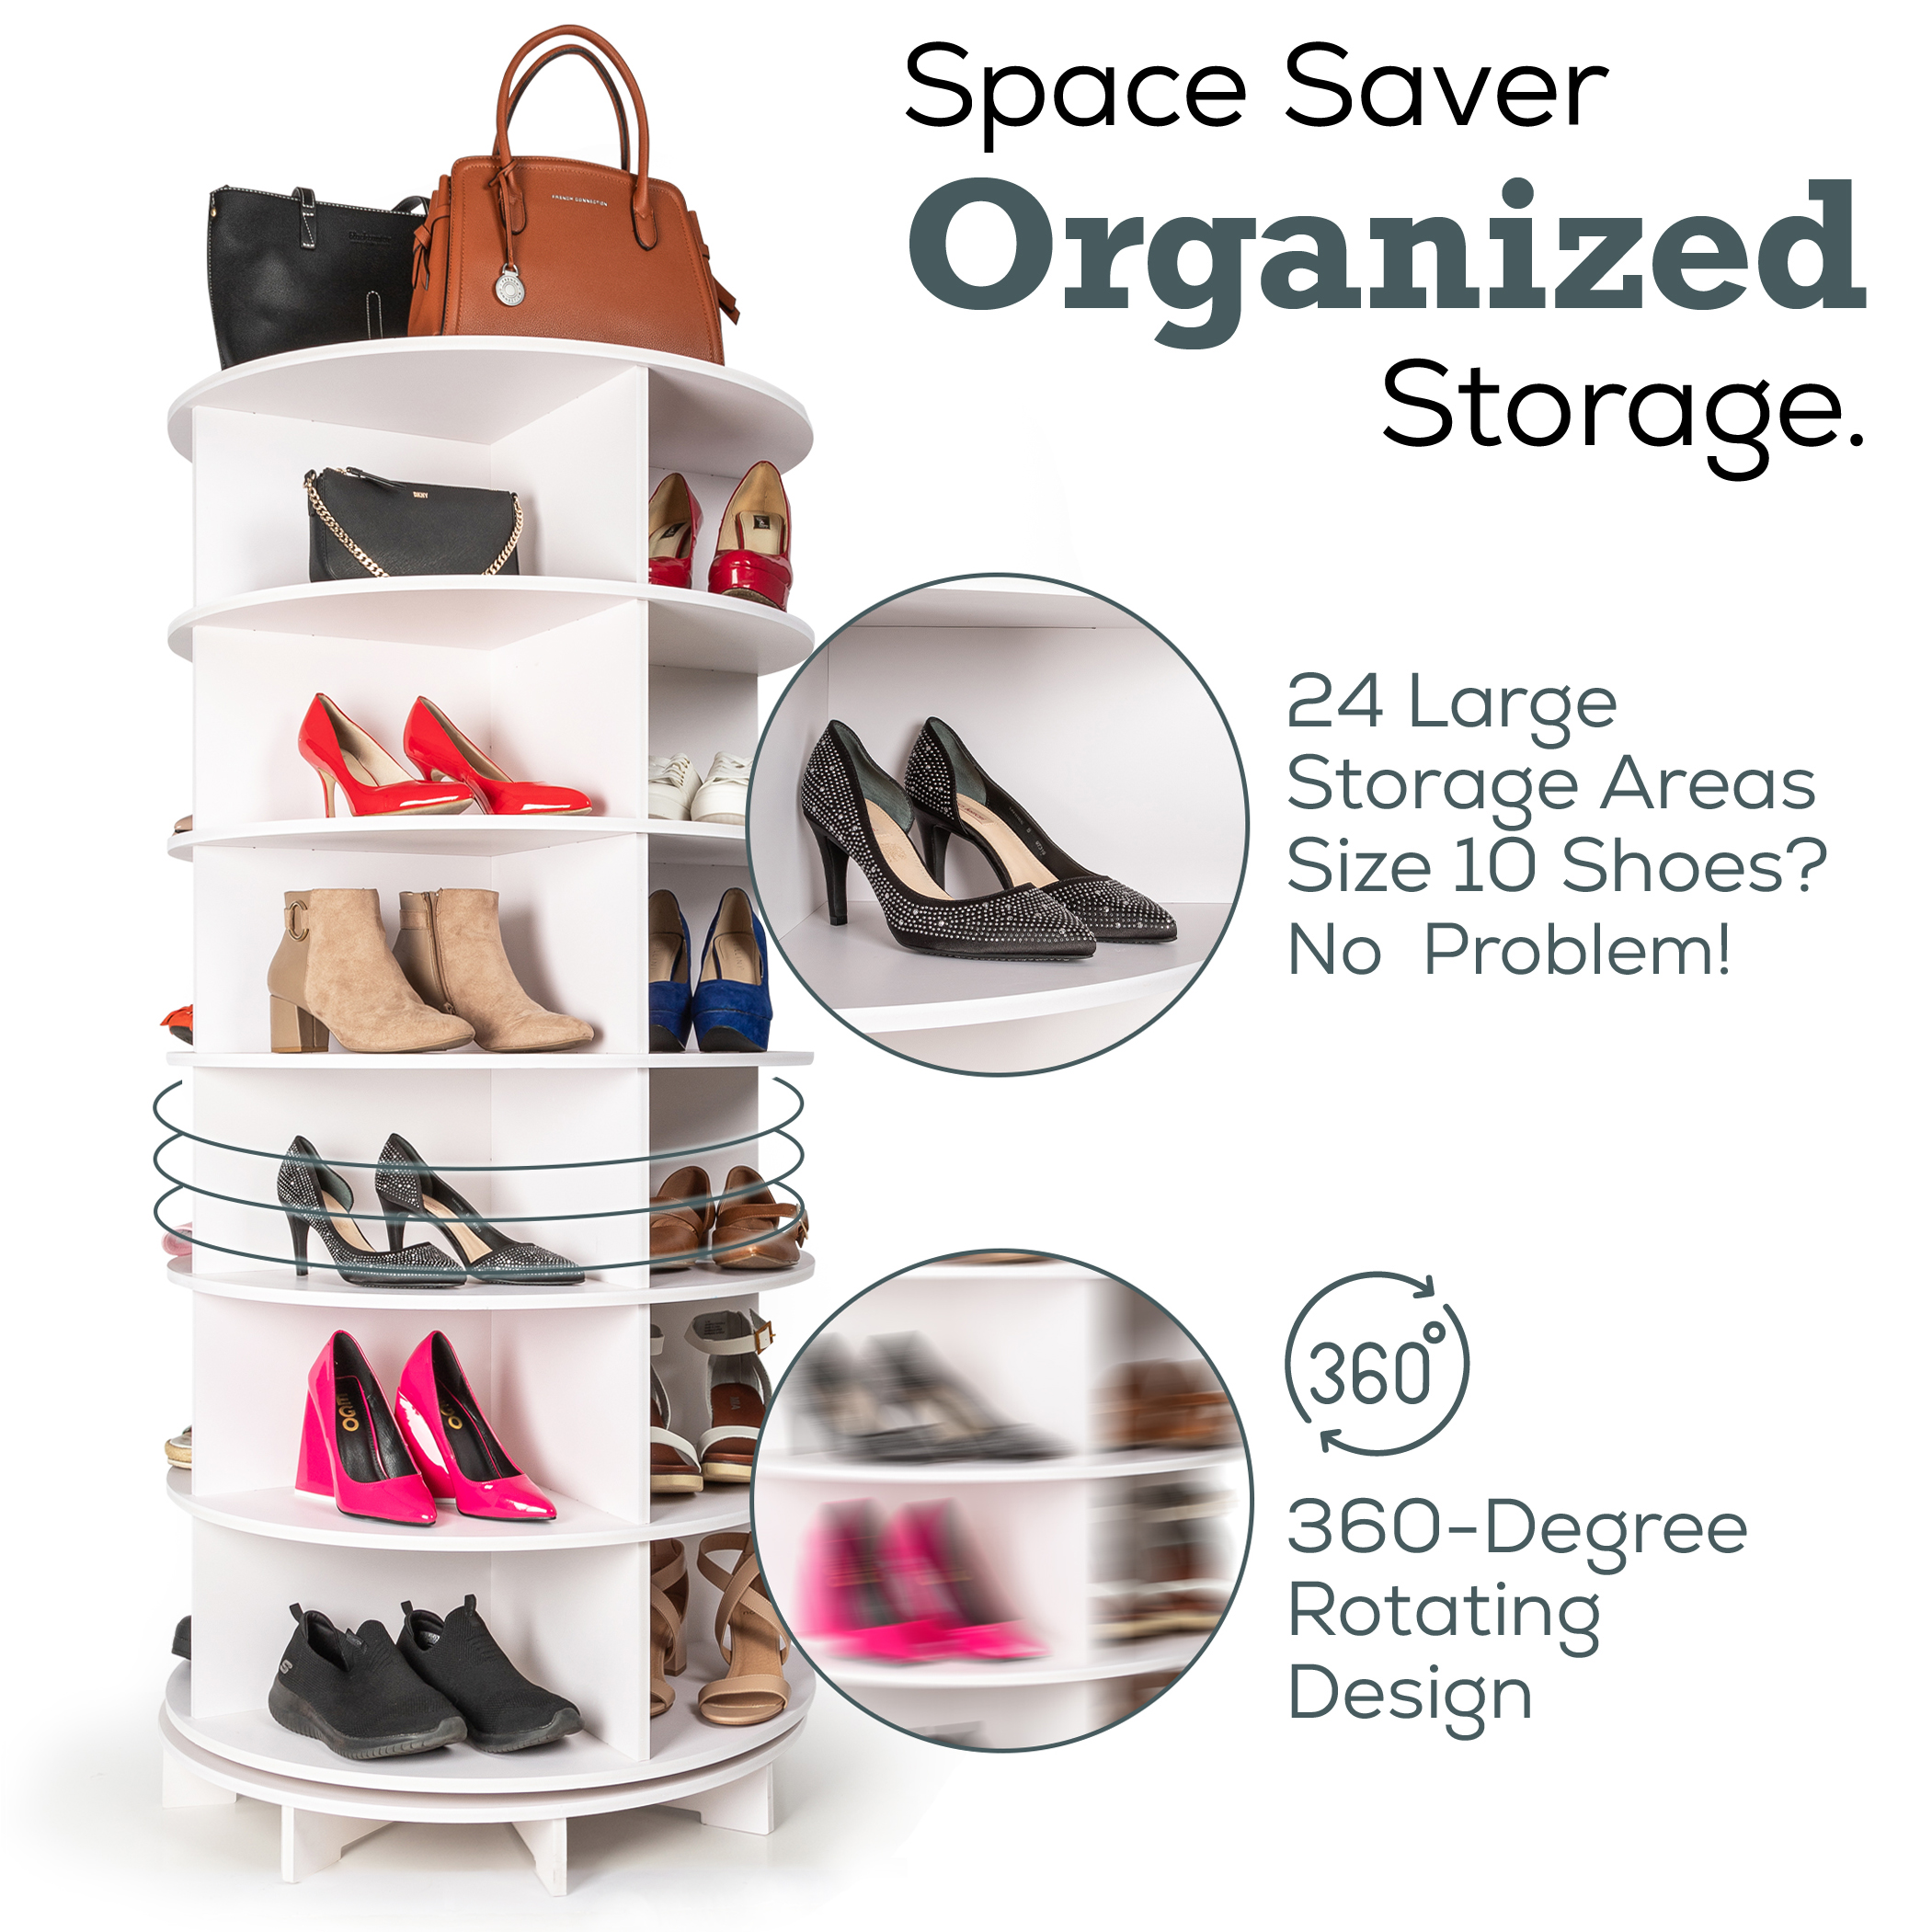 Example of an infographic for our Amazon infographic design service in Sydney. Shows a shoe rack with shoes on it and handbags as well as text and graphics on the image.